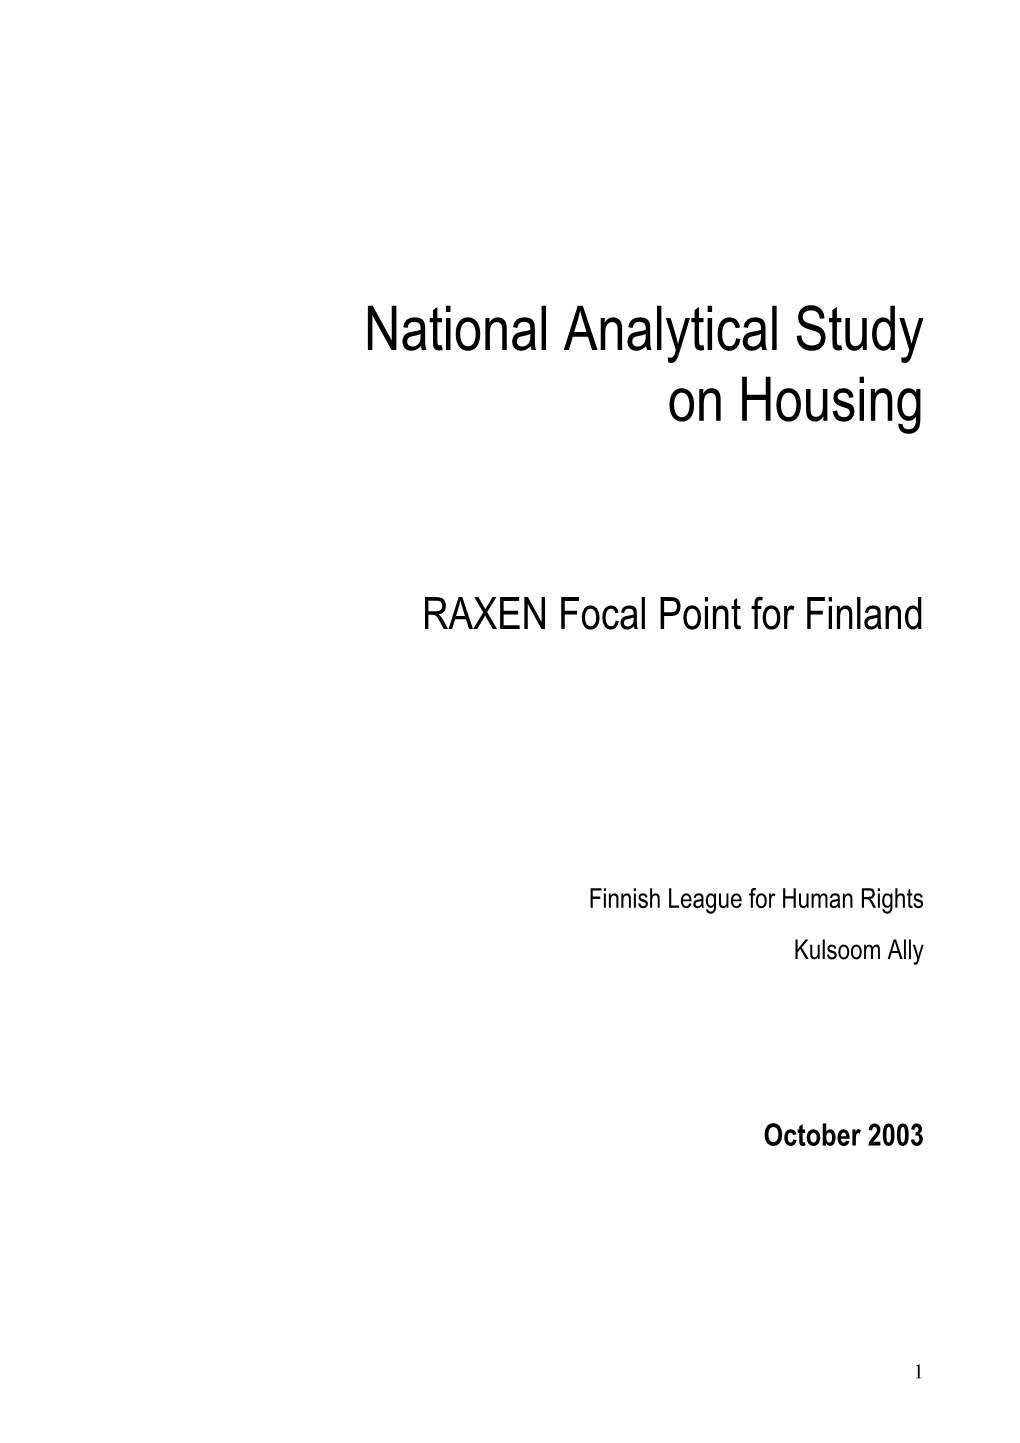 National Analytical Study on Housing